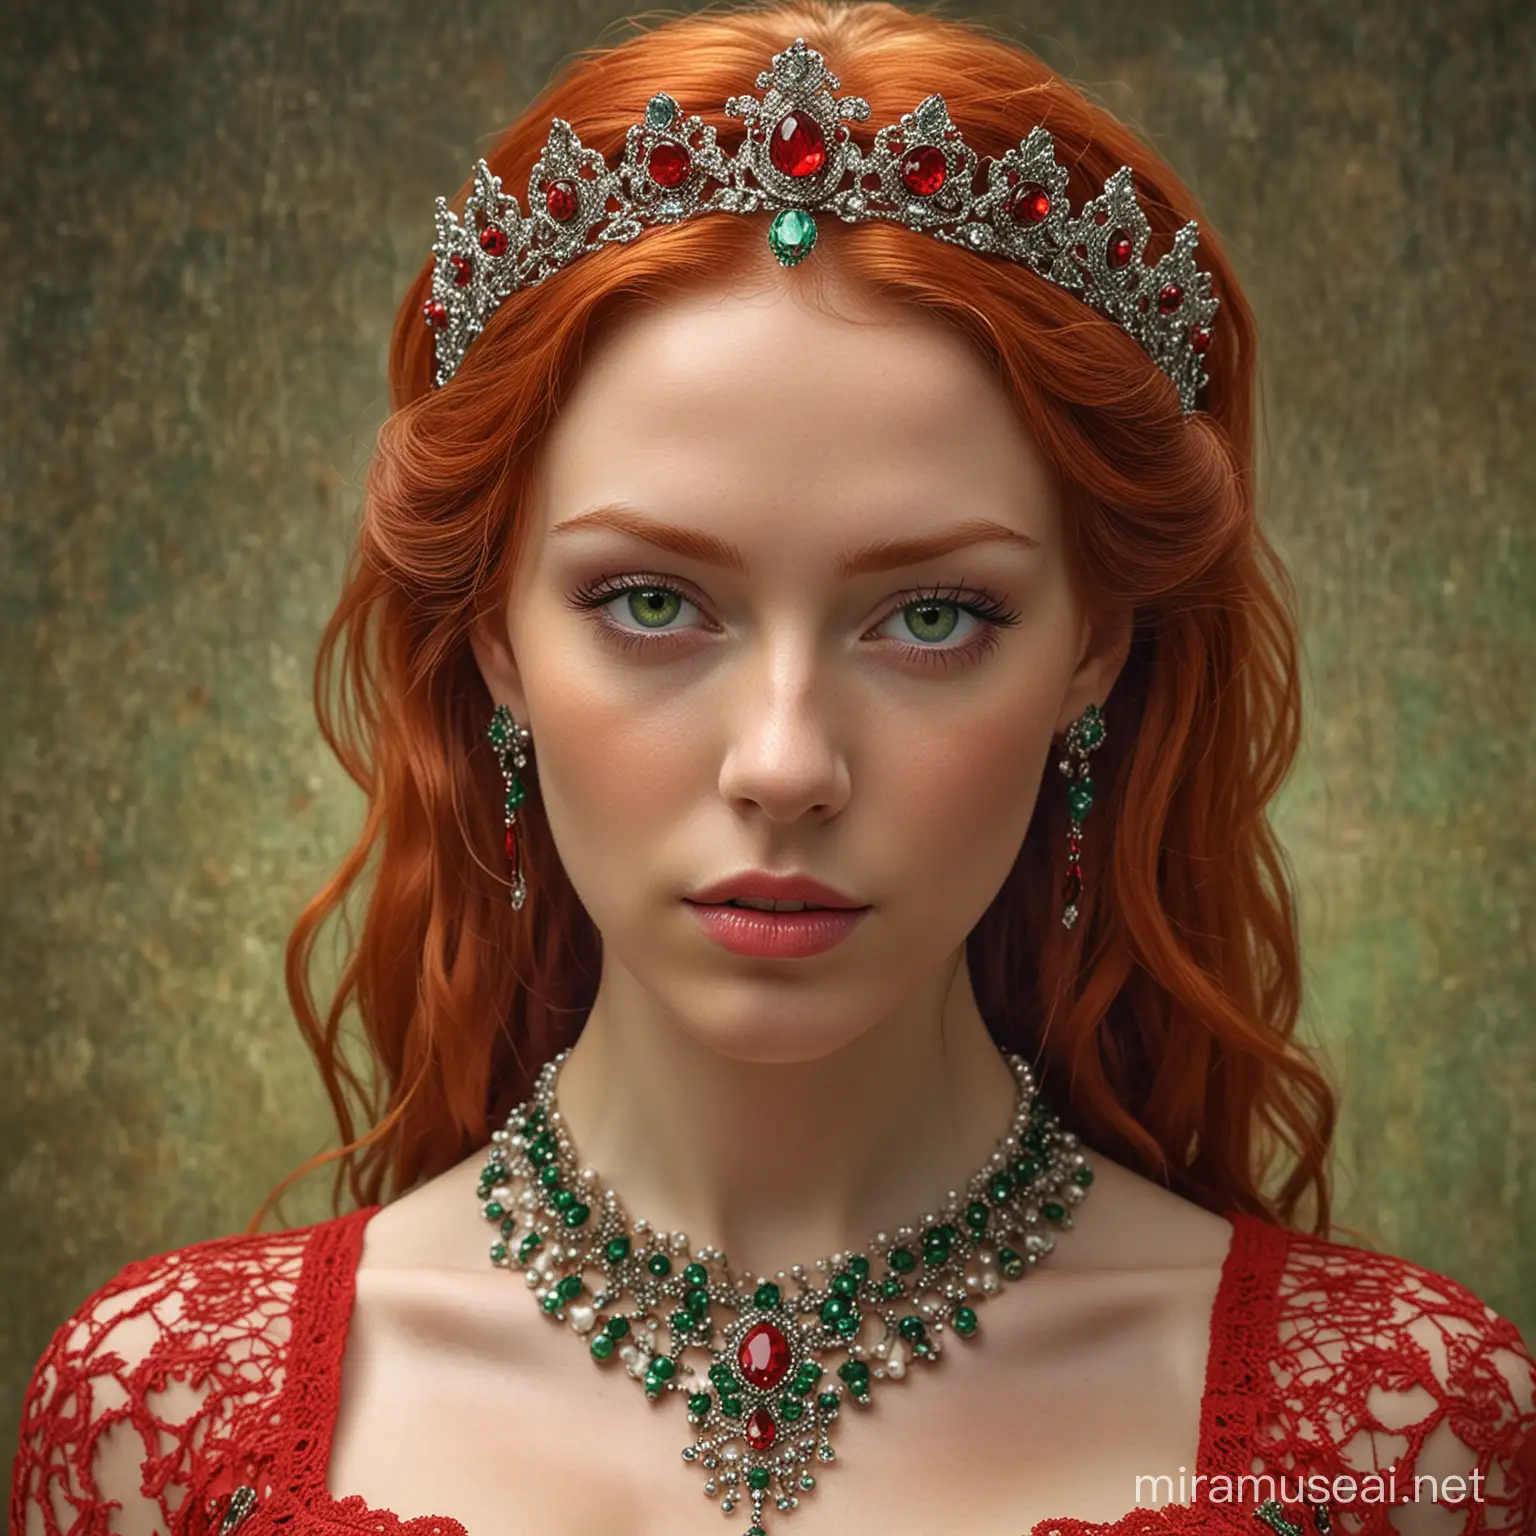 Gorgeous redhead woman, jeweled crown, adorned with beautiful red jewelry, porcelain skin, green eyes round like marbles, red lace dress, red hair, elaborately tied, ultra realistic, vivid colors in medium close-up, strong focus in symmetry, divine proportion, high quality, HDR.